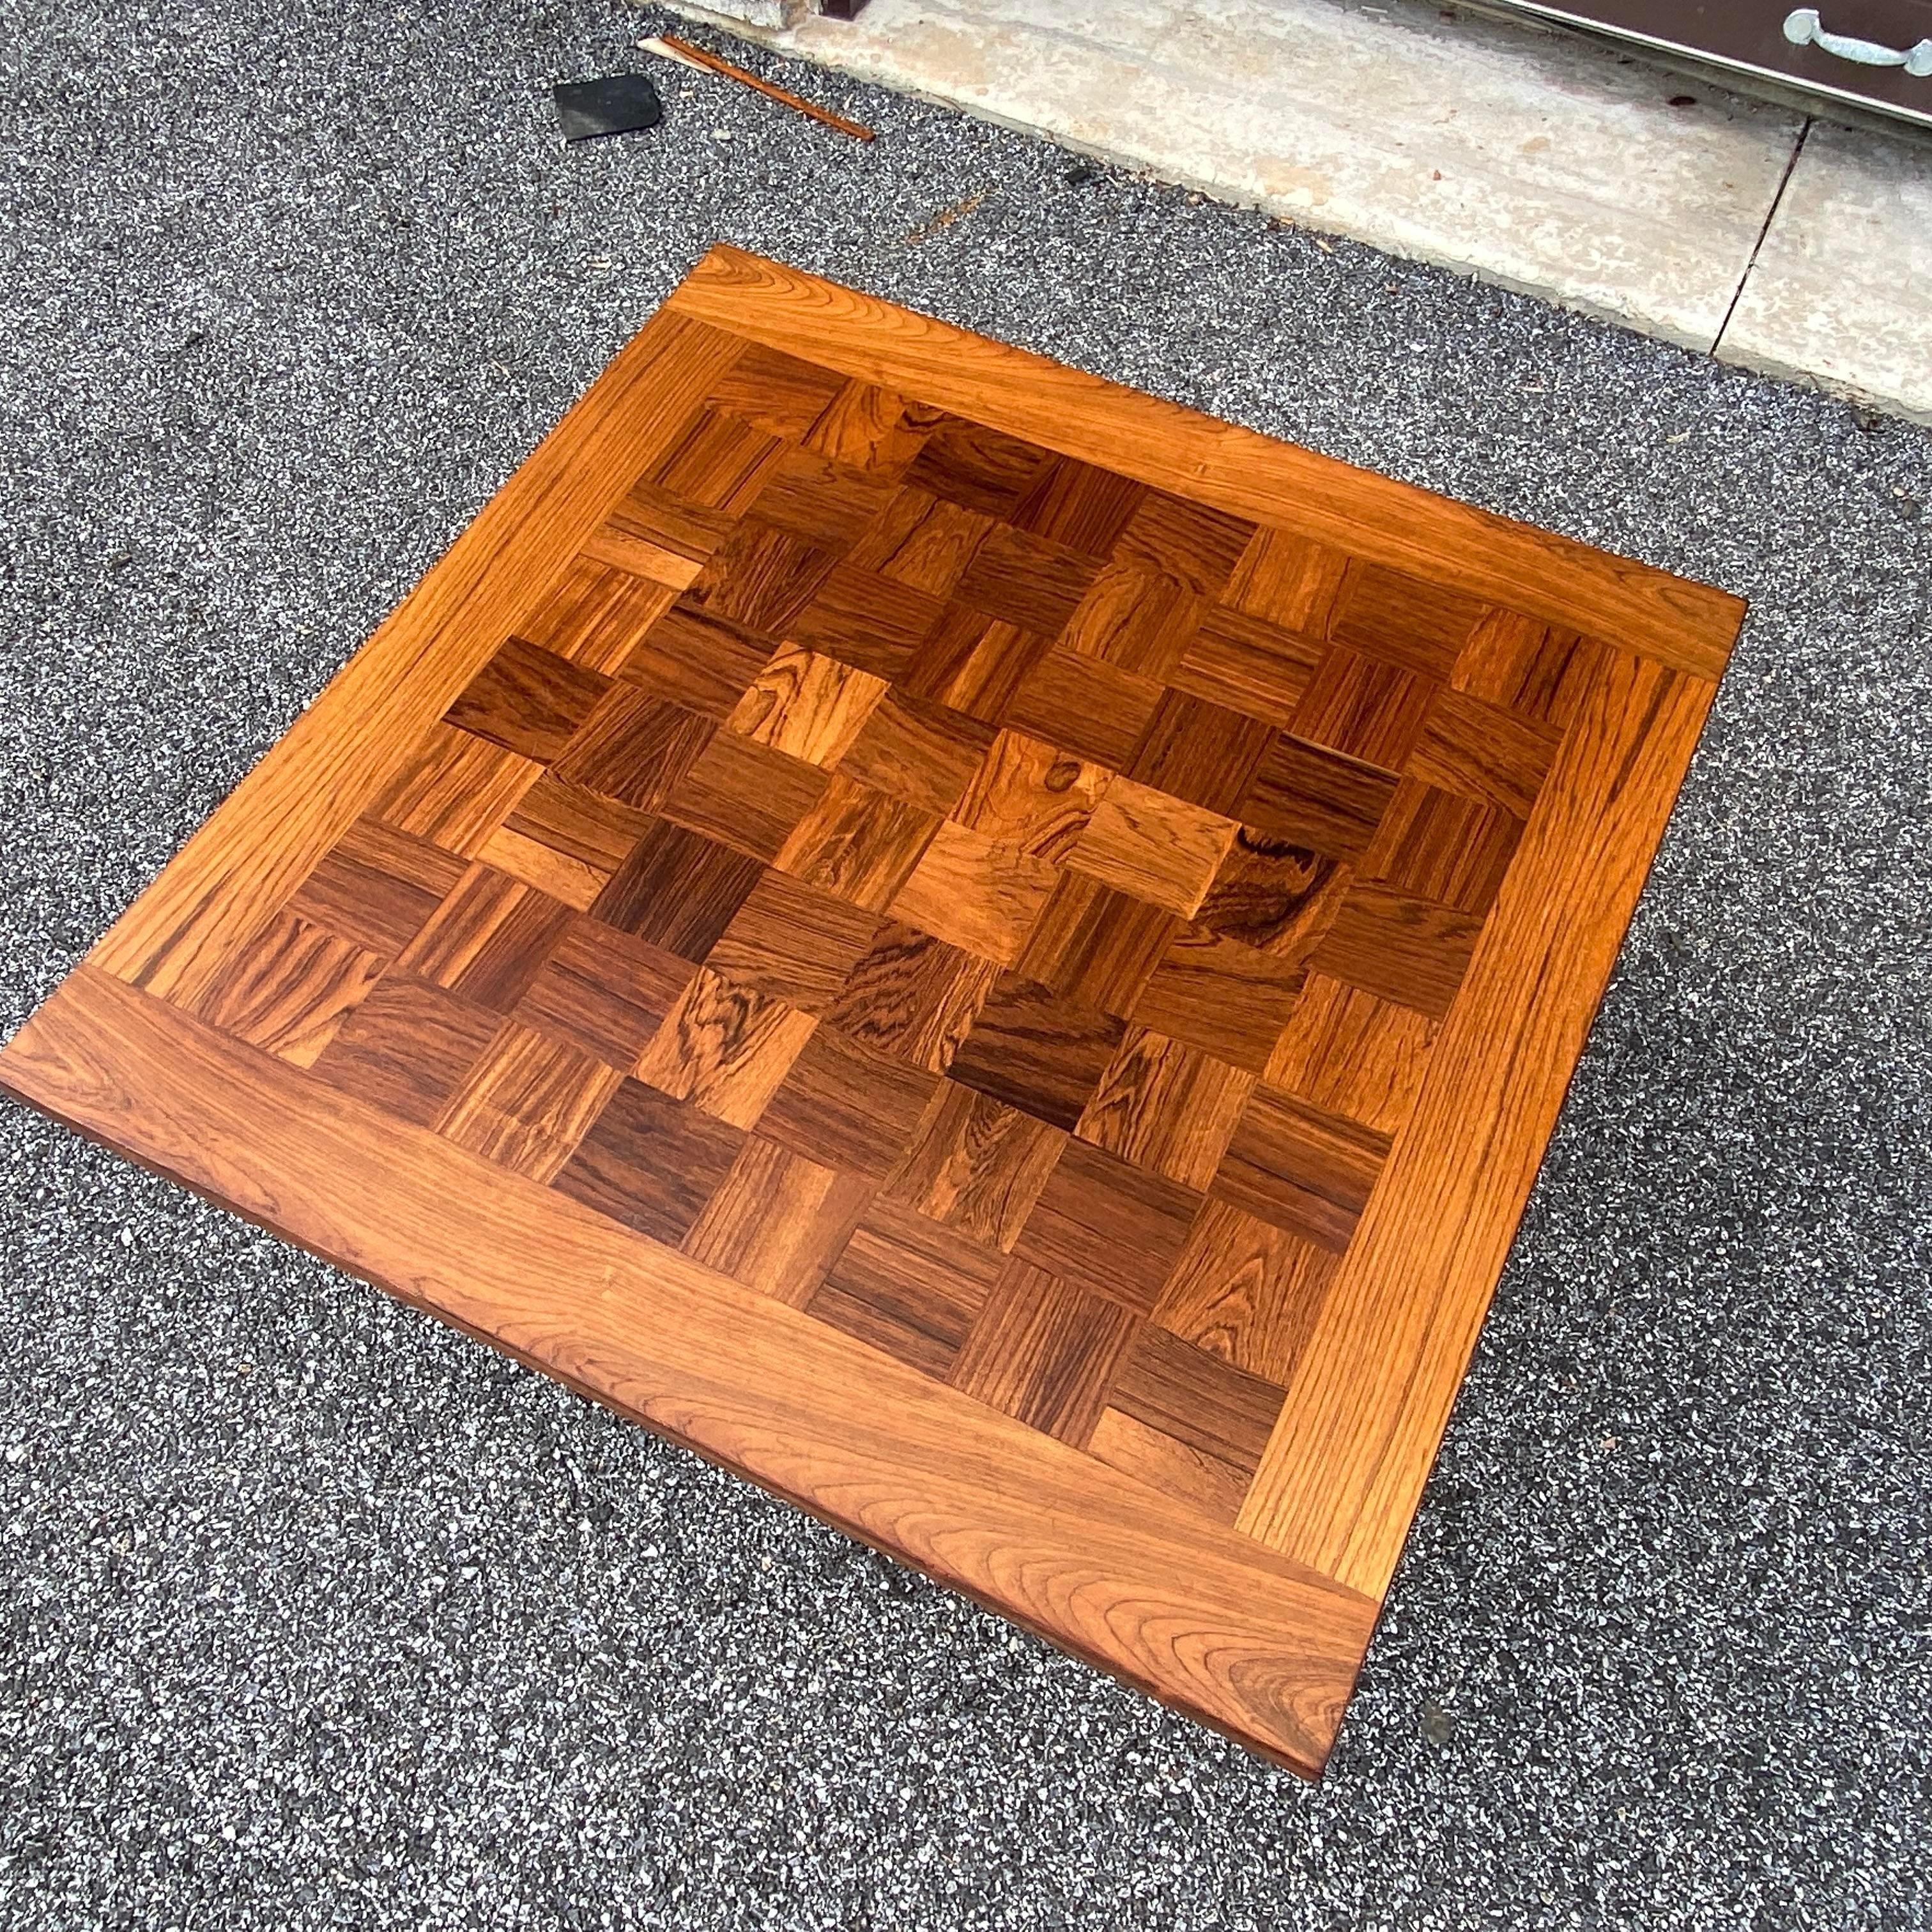 France & Son Danish Modern Rosewood Chessboard Coffee Table by Poul Cadovius For Sale 2